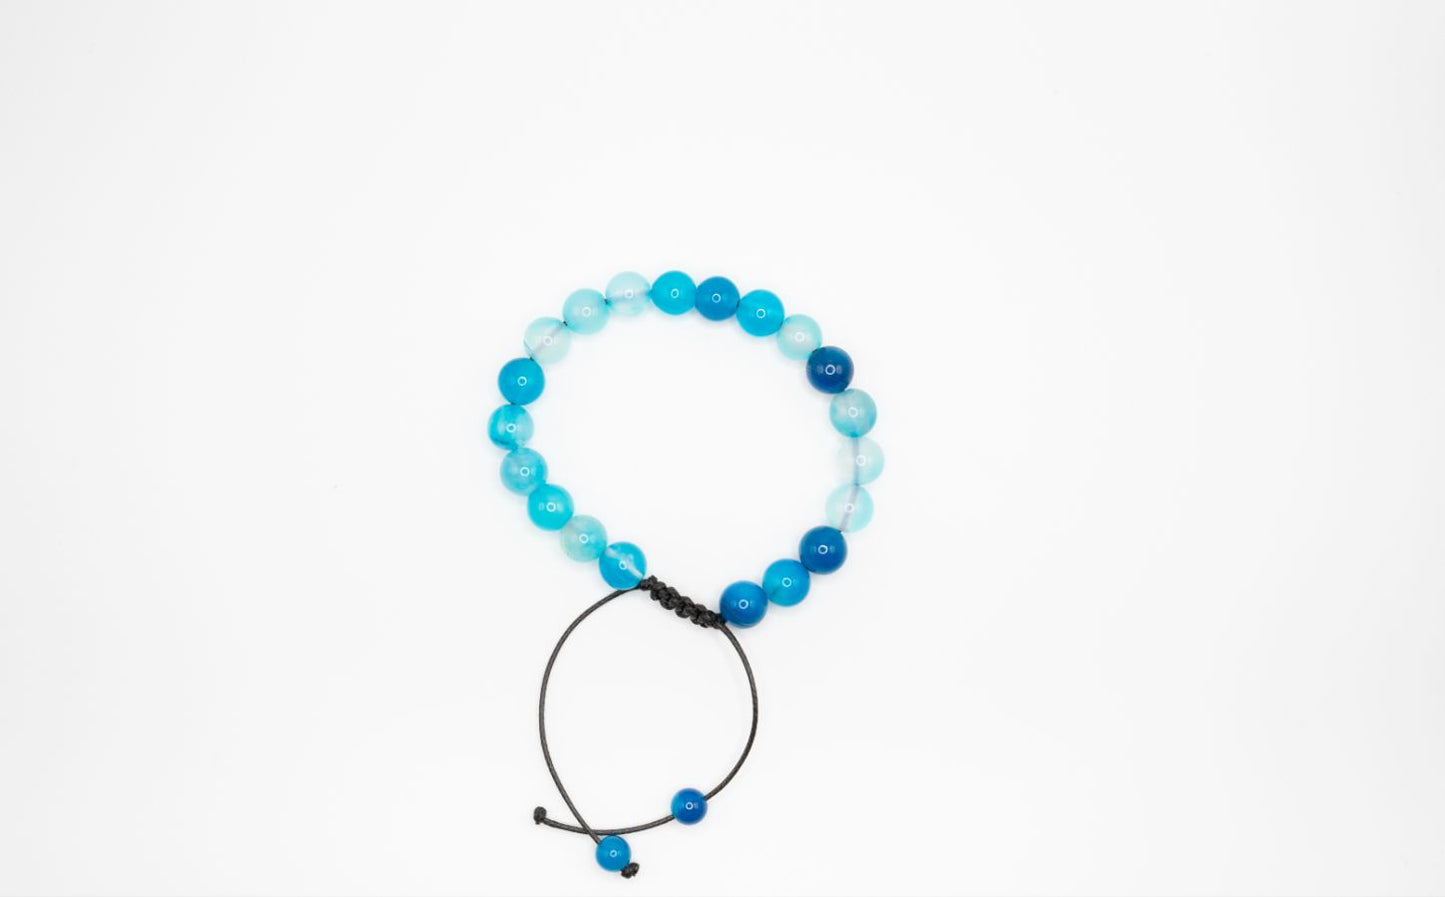 Natural Blue Agate Crystal Bracelet for Emotional Health – The “Stone of Freedom and Serenity”